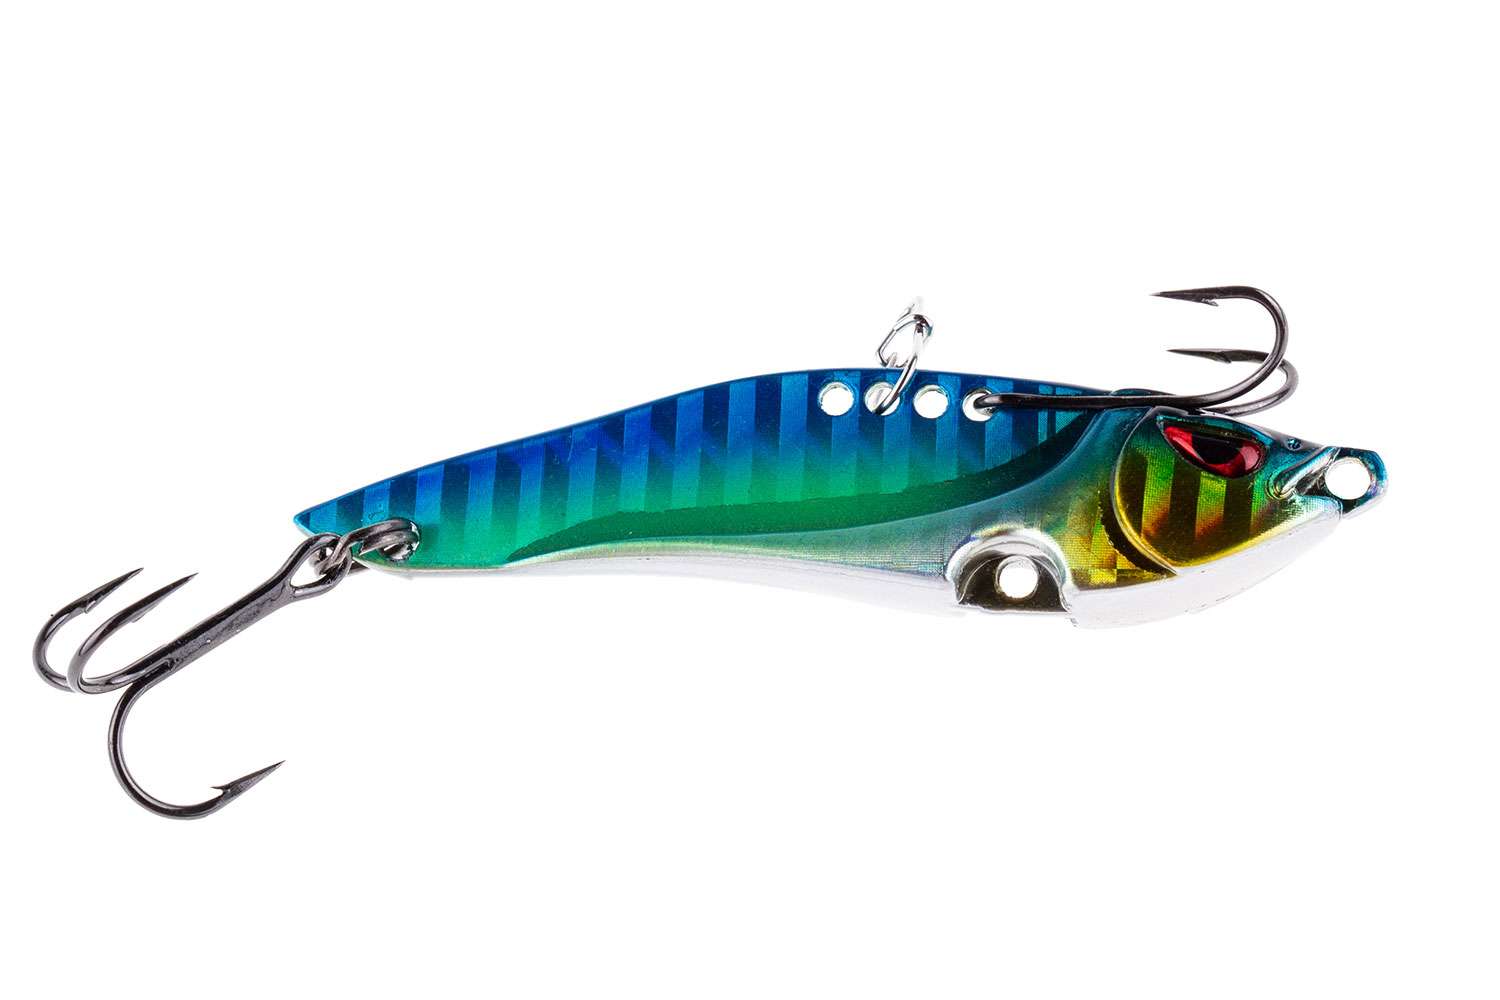 <p><b>Freedom Tackle Blade Bait</b></p>
The most versatile blade bait on the market. The Freedom Blade Bait is a three in one tool to get the job done through all four seasons. The lures feature multiple ways to rig the hooks to match your desired presentation. The most unique feature is the ability to rig the VMC double hook on the top of lure head and lock it into place on the custom design hook notch. This allows anglers to tap the nose of the lure on rocky bottoms without the fear of hang-up. The second way to rig, is to put hooks at the nose and tail of the lure to make a horizontal vibrating presentation. The final rigging is the traditional bass configuration with hooks on the belly and tail. Three configurations that like all Freedom products give you the ability to customize to your liking. Available in 1/2- and 3/4-ounce models and 10 colors. <br>
<p><b>MSRP $9.99</b></p>
<a href=